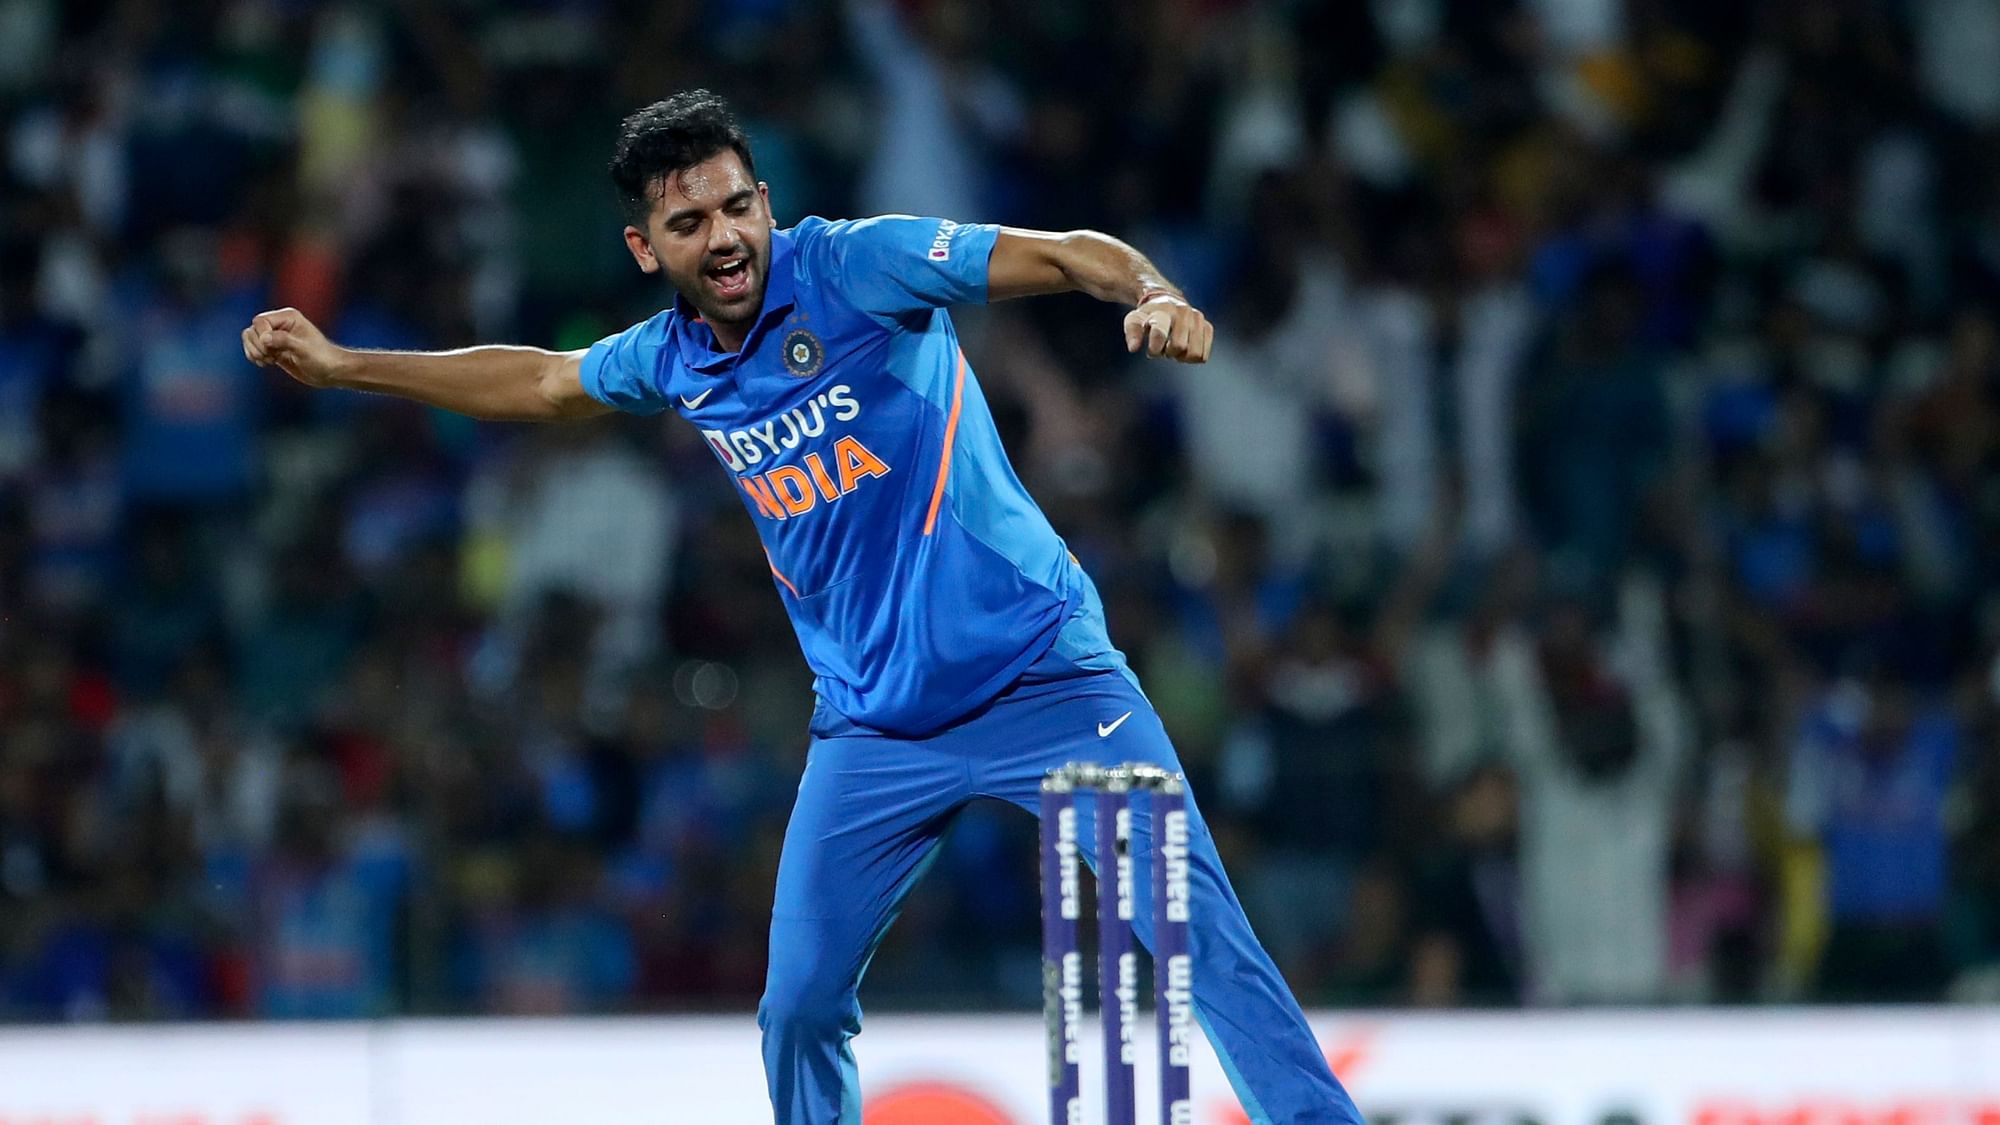 Deepak Chahar has played three ODIs and 10 T20Is for India so far.